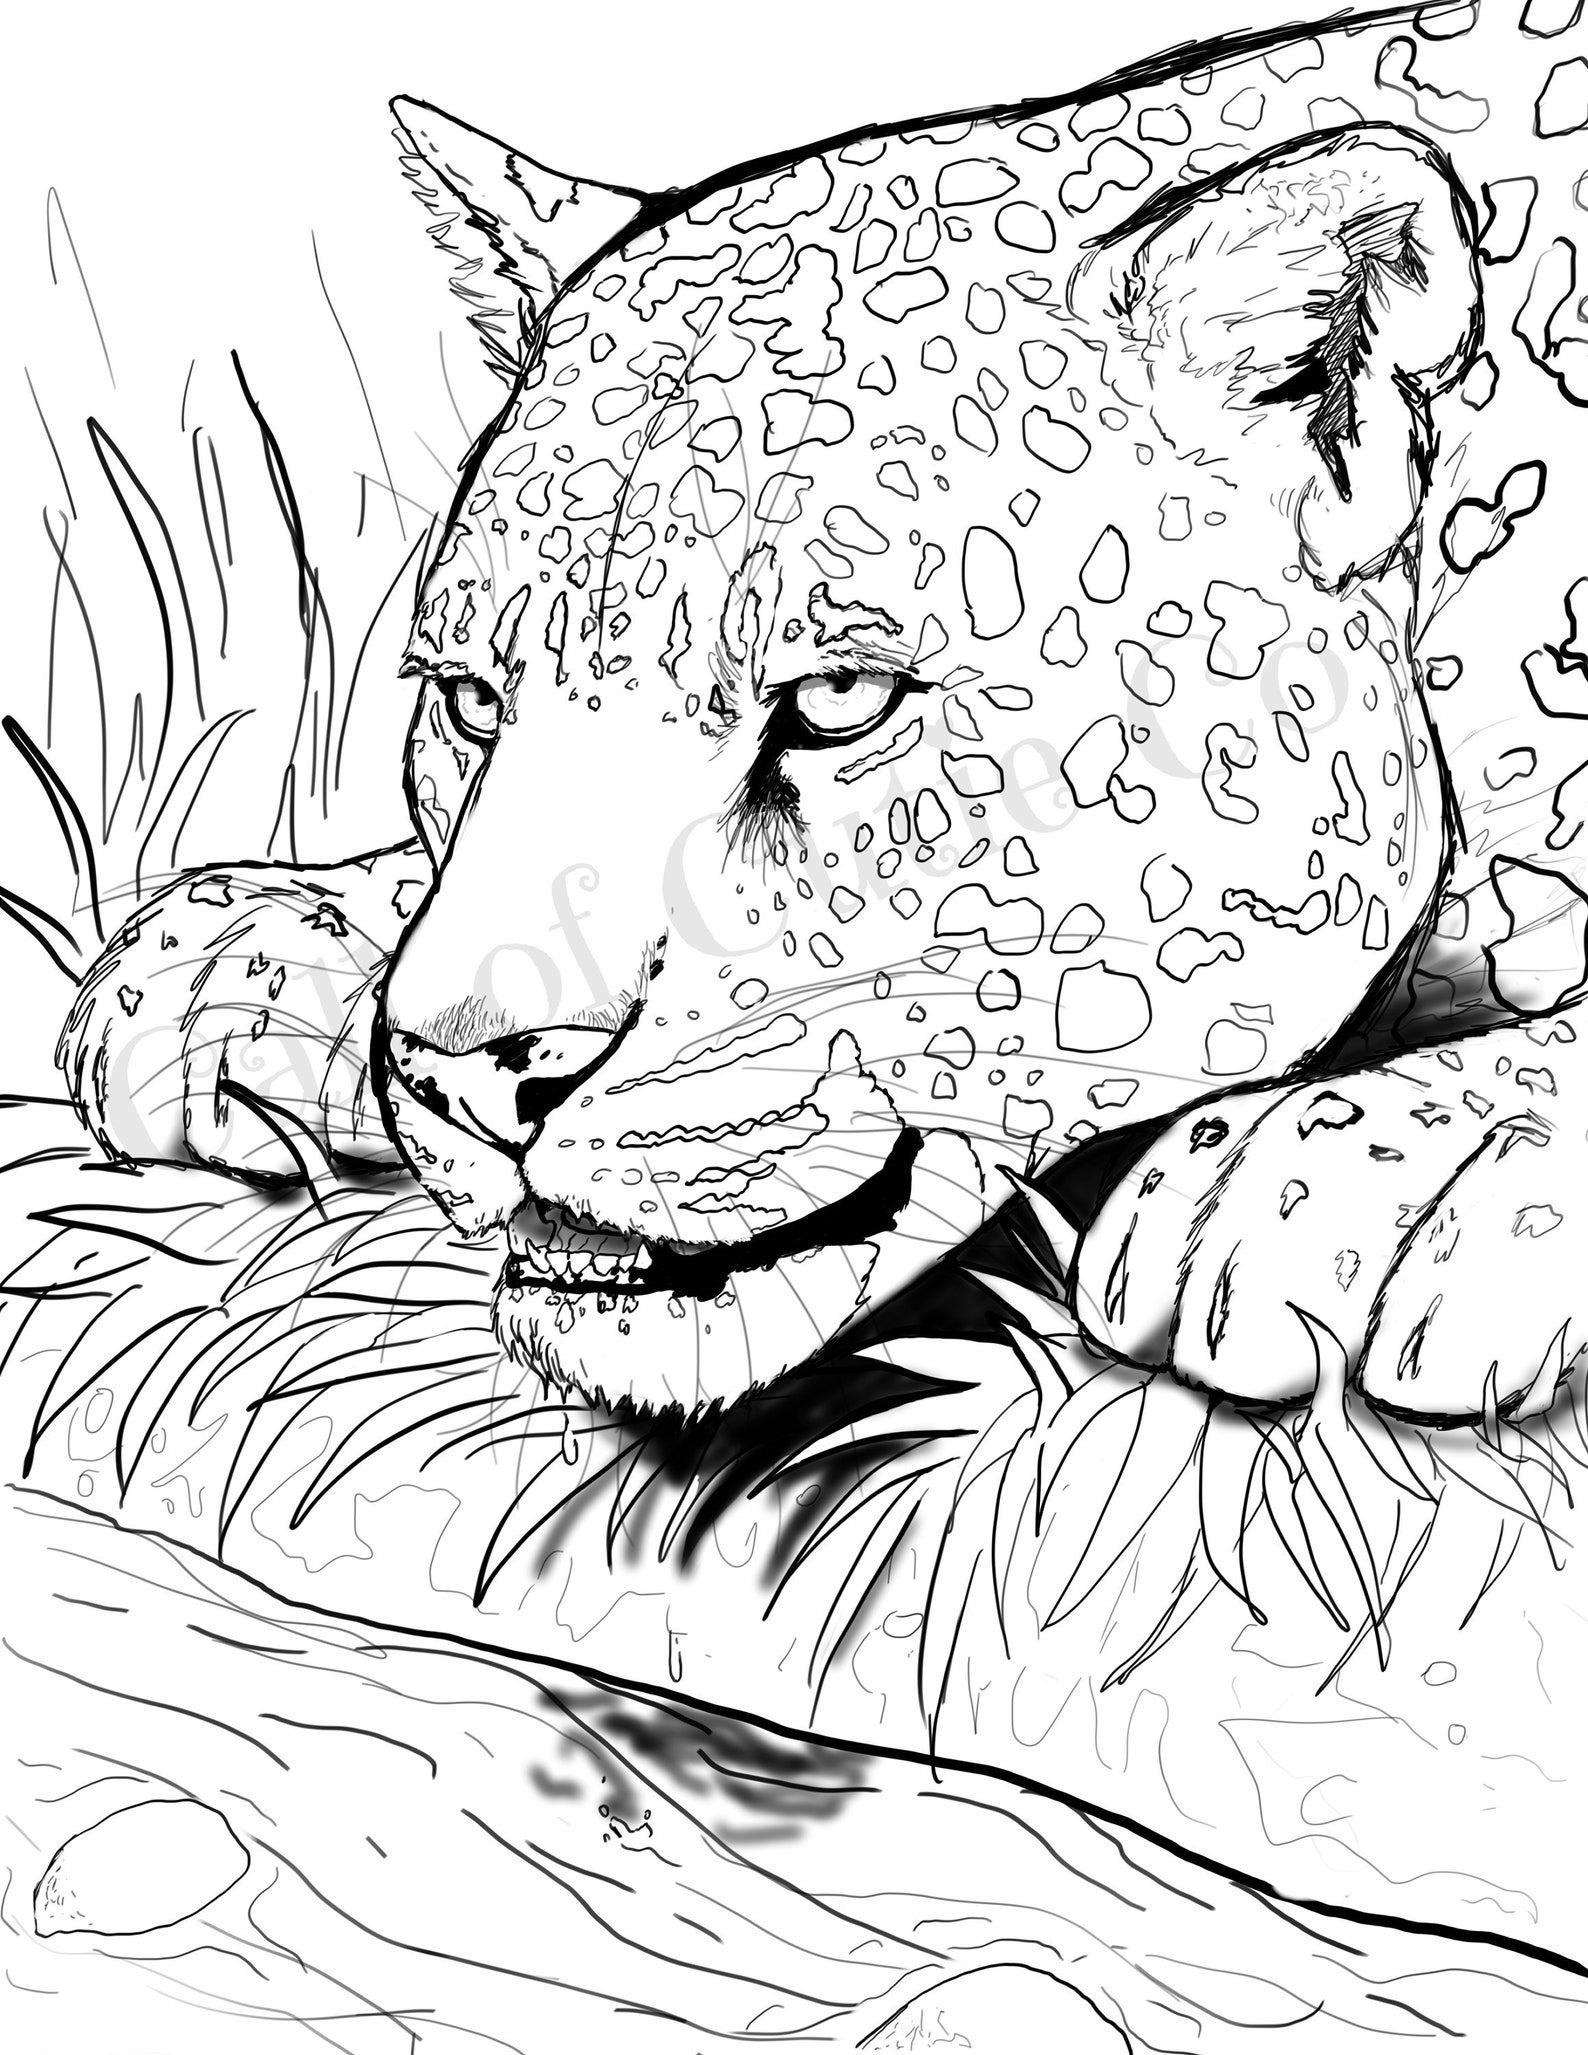 Jaguar Coloring Page Animal Coloring Page - Etsy